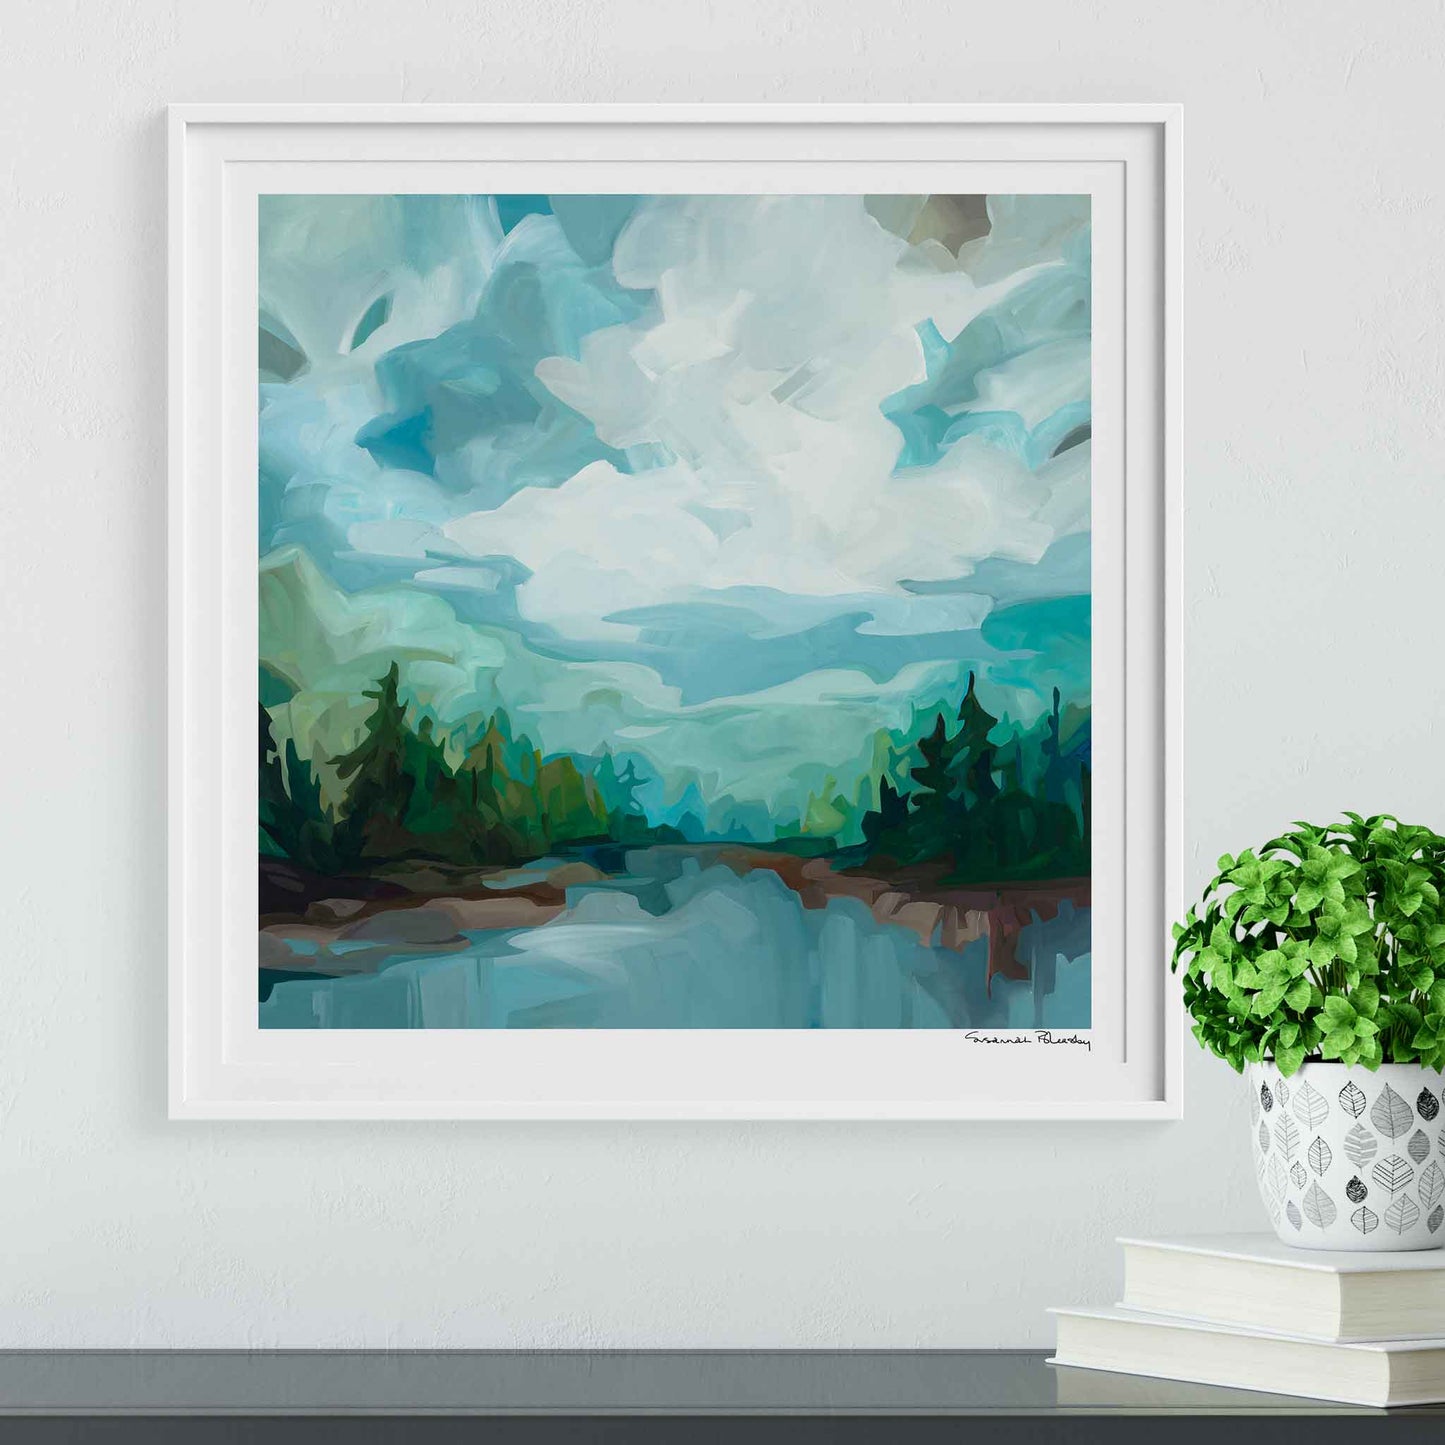 lake scene painting with trees under abstract sky as framed fine art print by Canadian abstract artist Susannah Bleasby